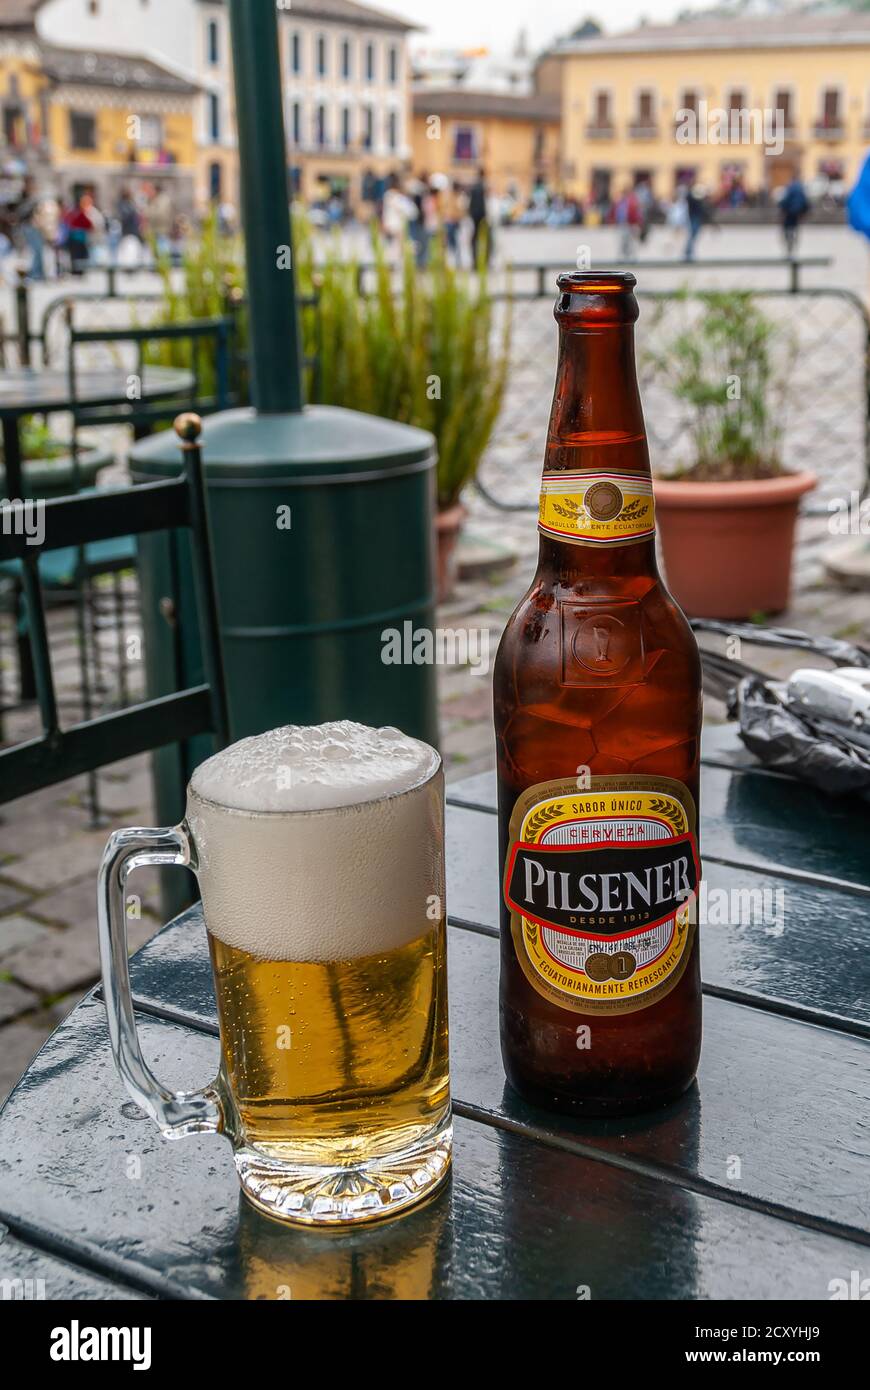 Quito, Ecuador - December 2, 2008: Historic downtown. Closeup of bottle and glass filled with Pilsener local brand beer, standing on black table. Fade Stock Photo